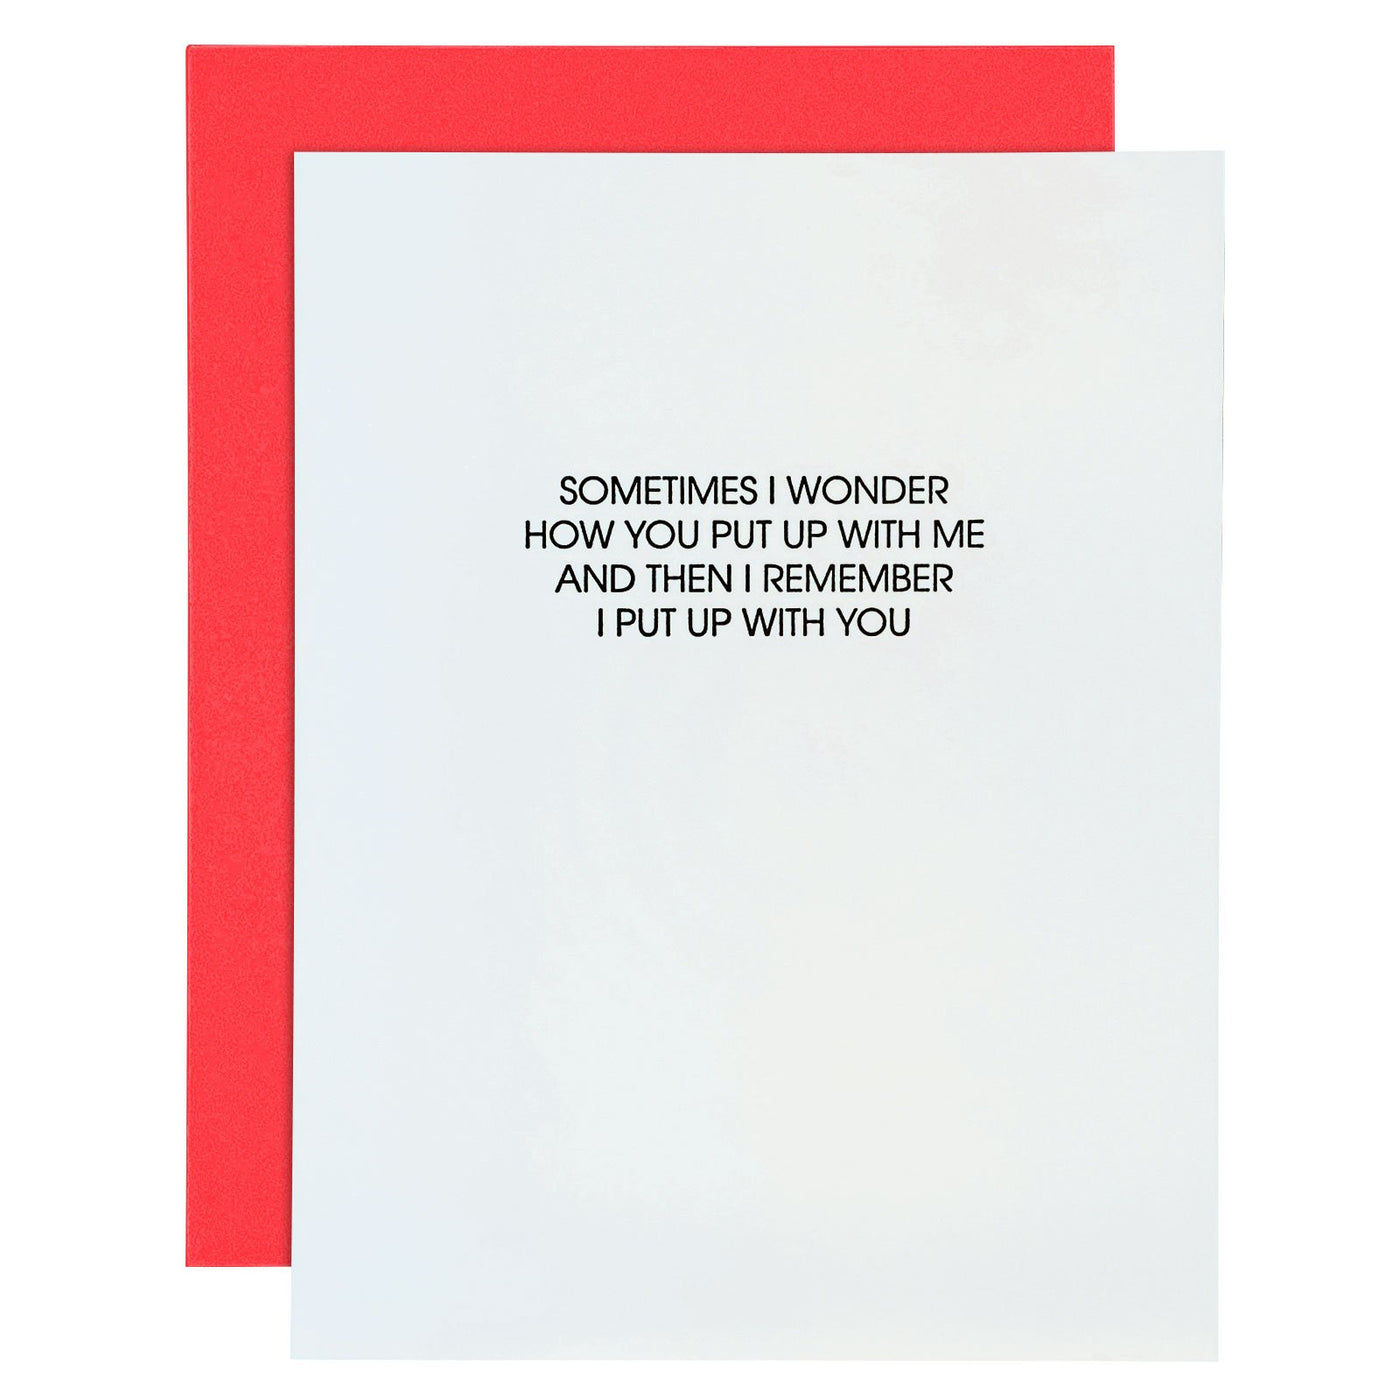 CARD LETTERPRESS "PUT UP WITH ME"